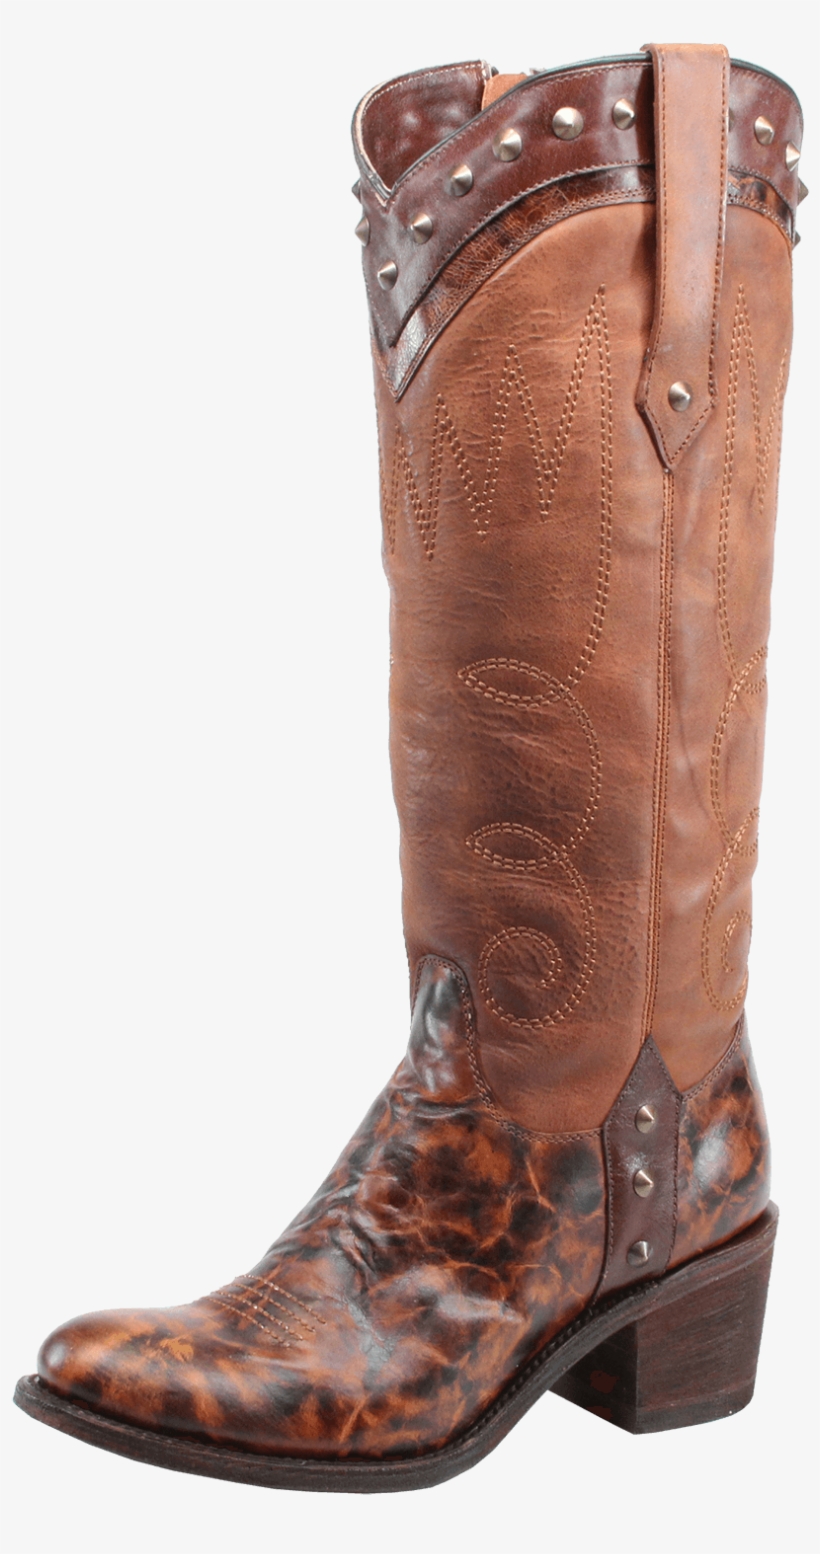 Corral Women's Embroidery Tall Top Cowgirl Boot - Cognac, transparent png #5981980